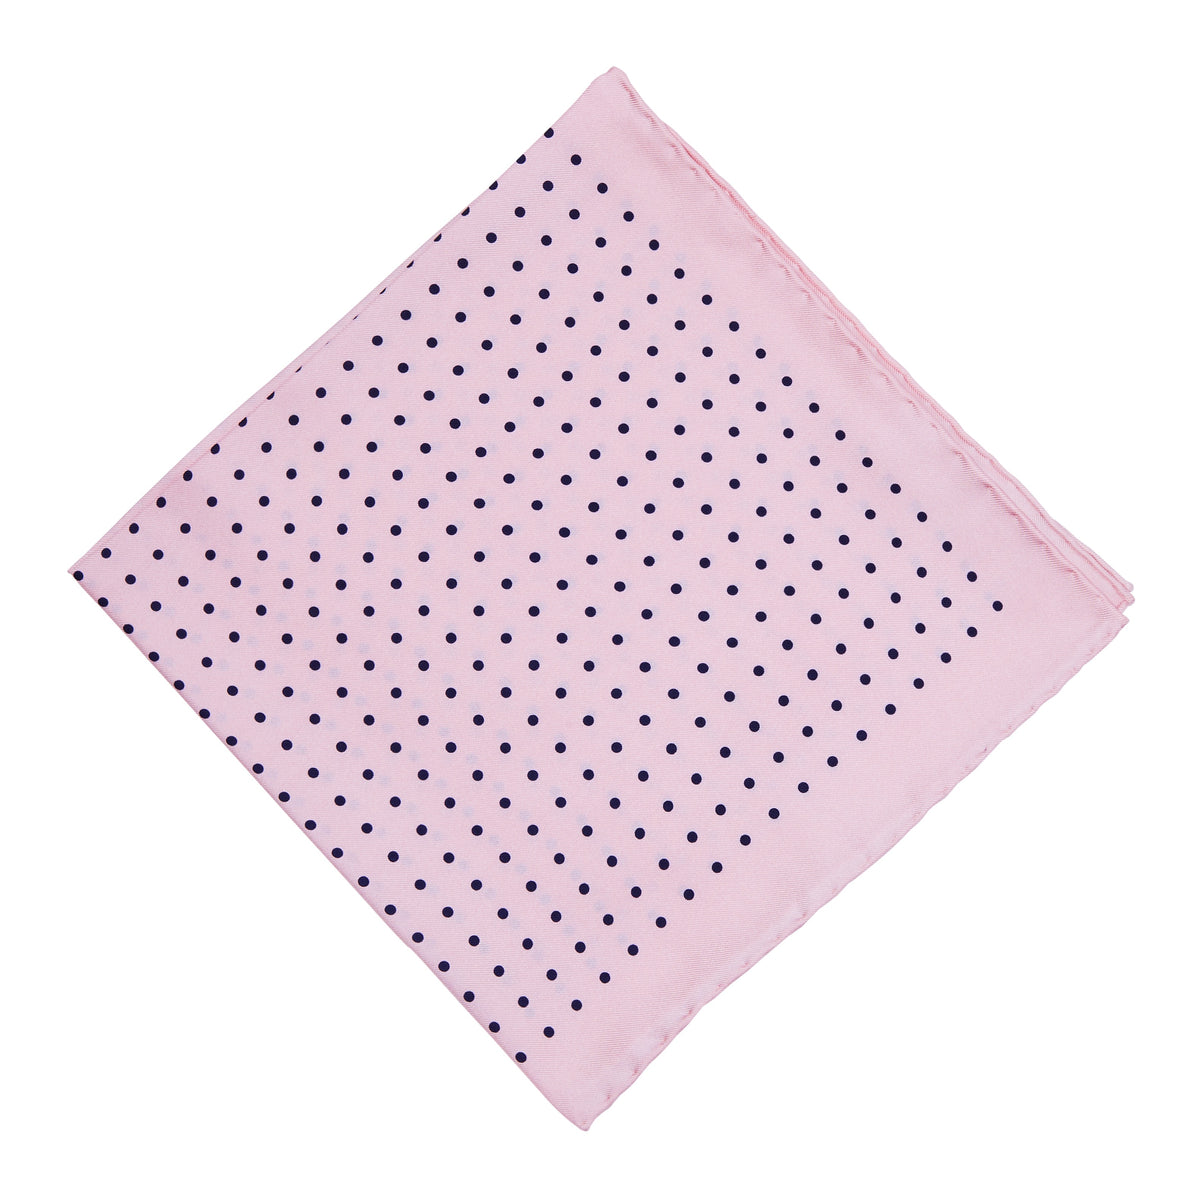 Sovereign Grade 100% Silk Pink London Dot Pocket Square with hand-rolled edges and KirbyAllison.com.